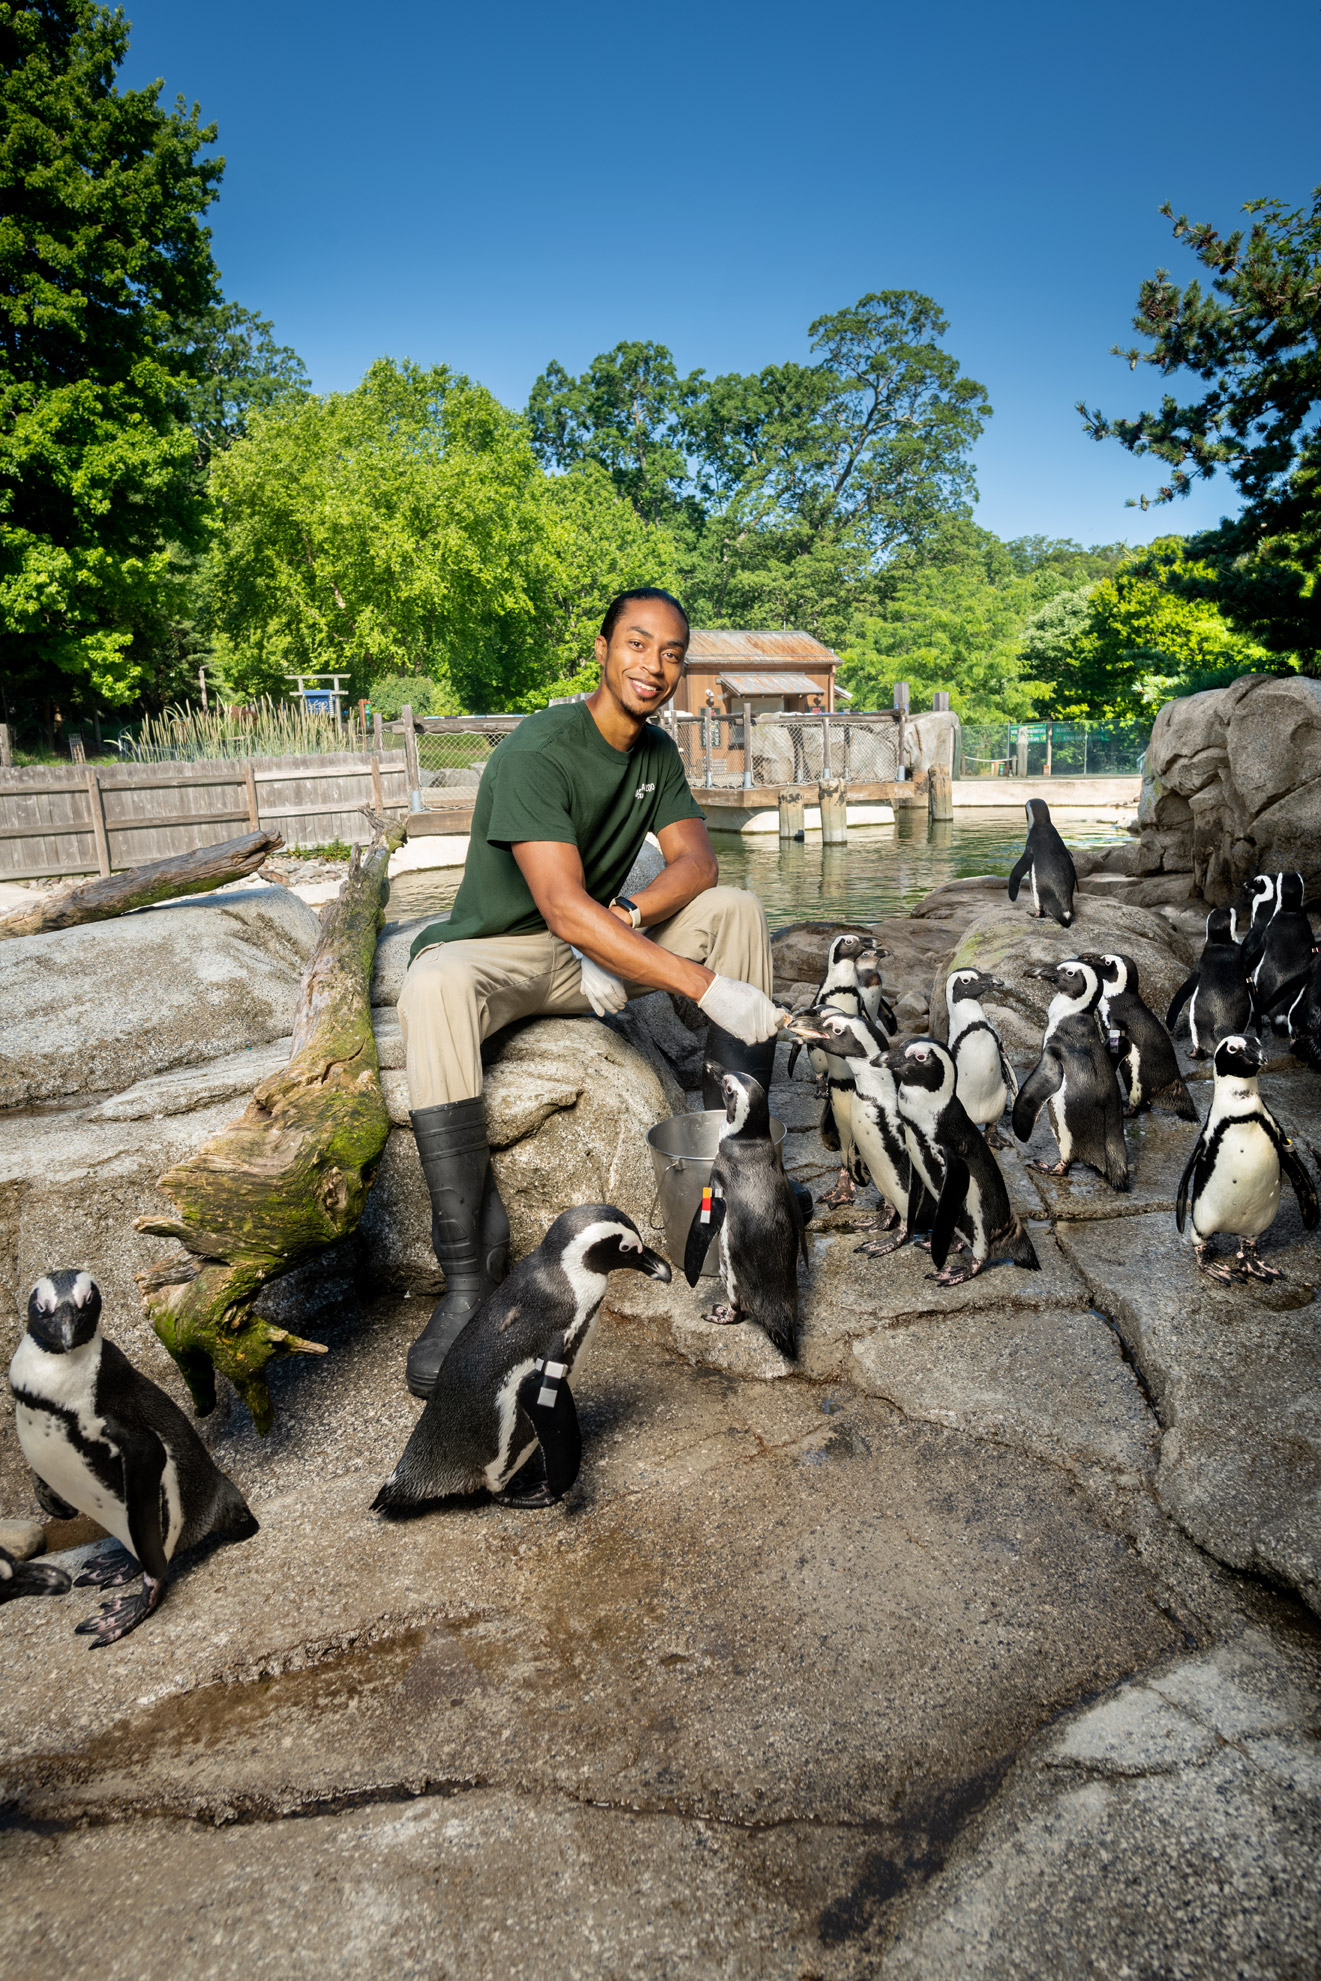 Zookeeper Ransom Livingston seated and feeding South African penguins at the Maryland Zoo